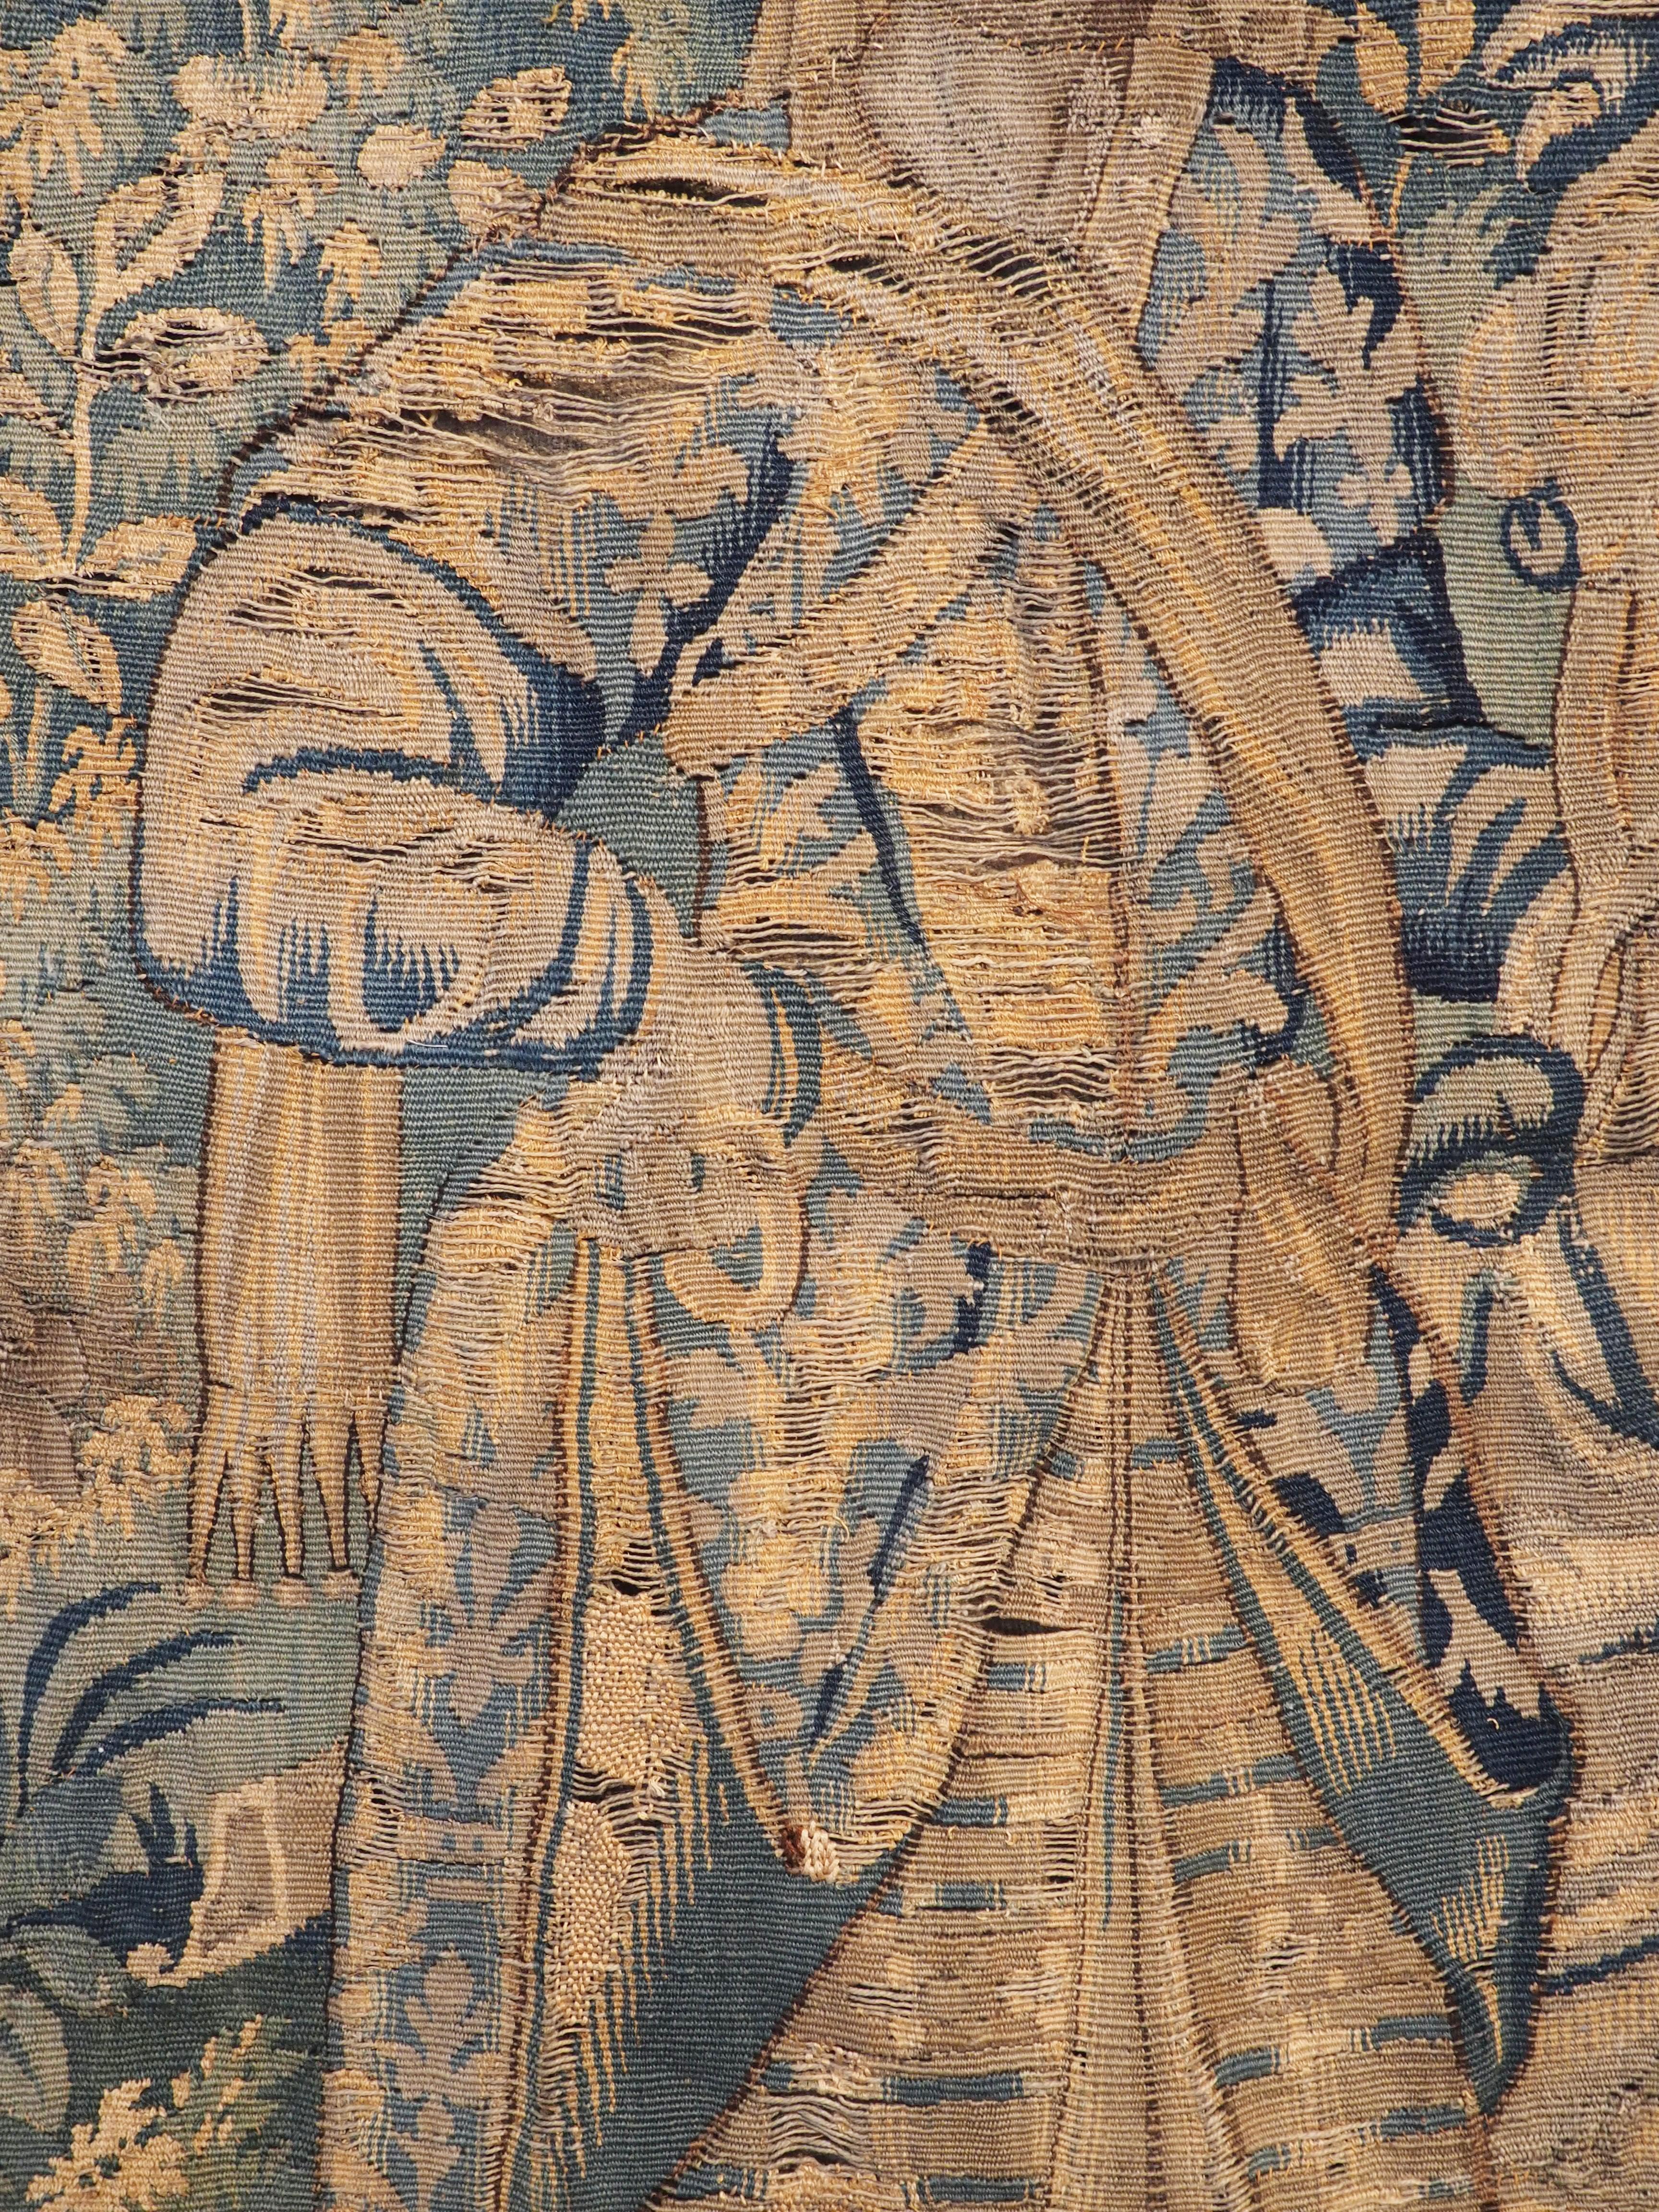 Hand-Woven 16th Century Verdure Landscape Tapestry from Flanders